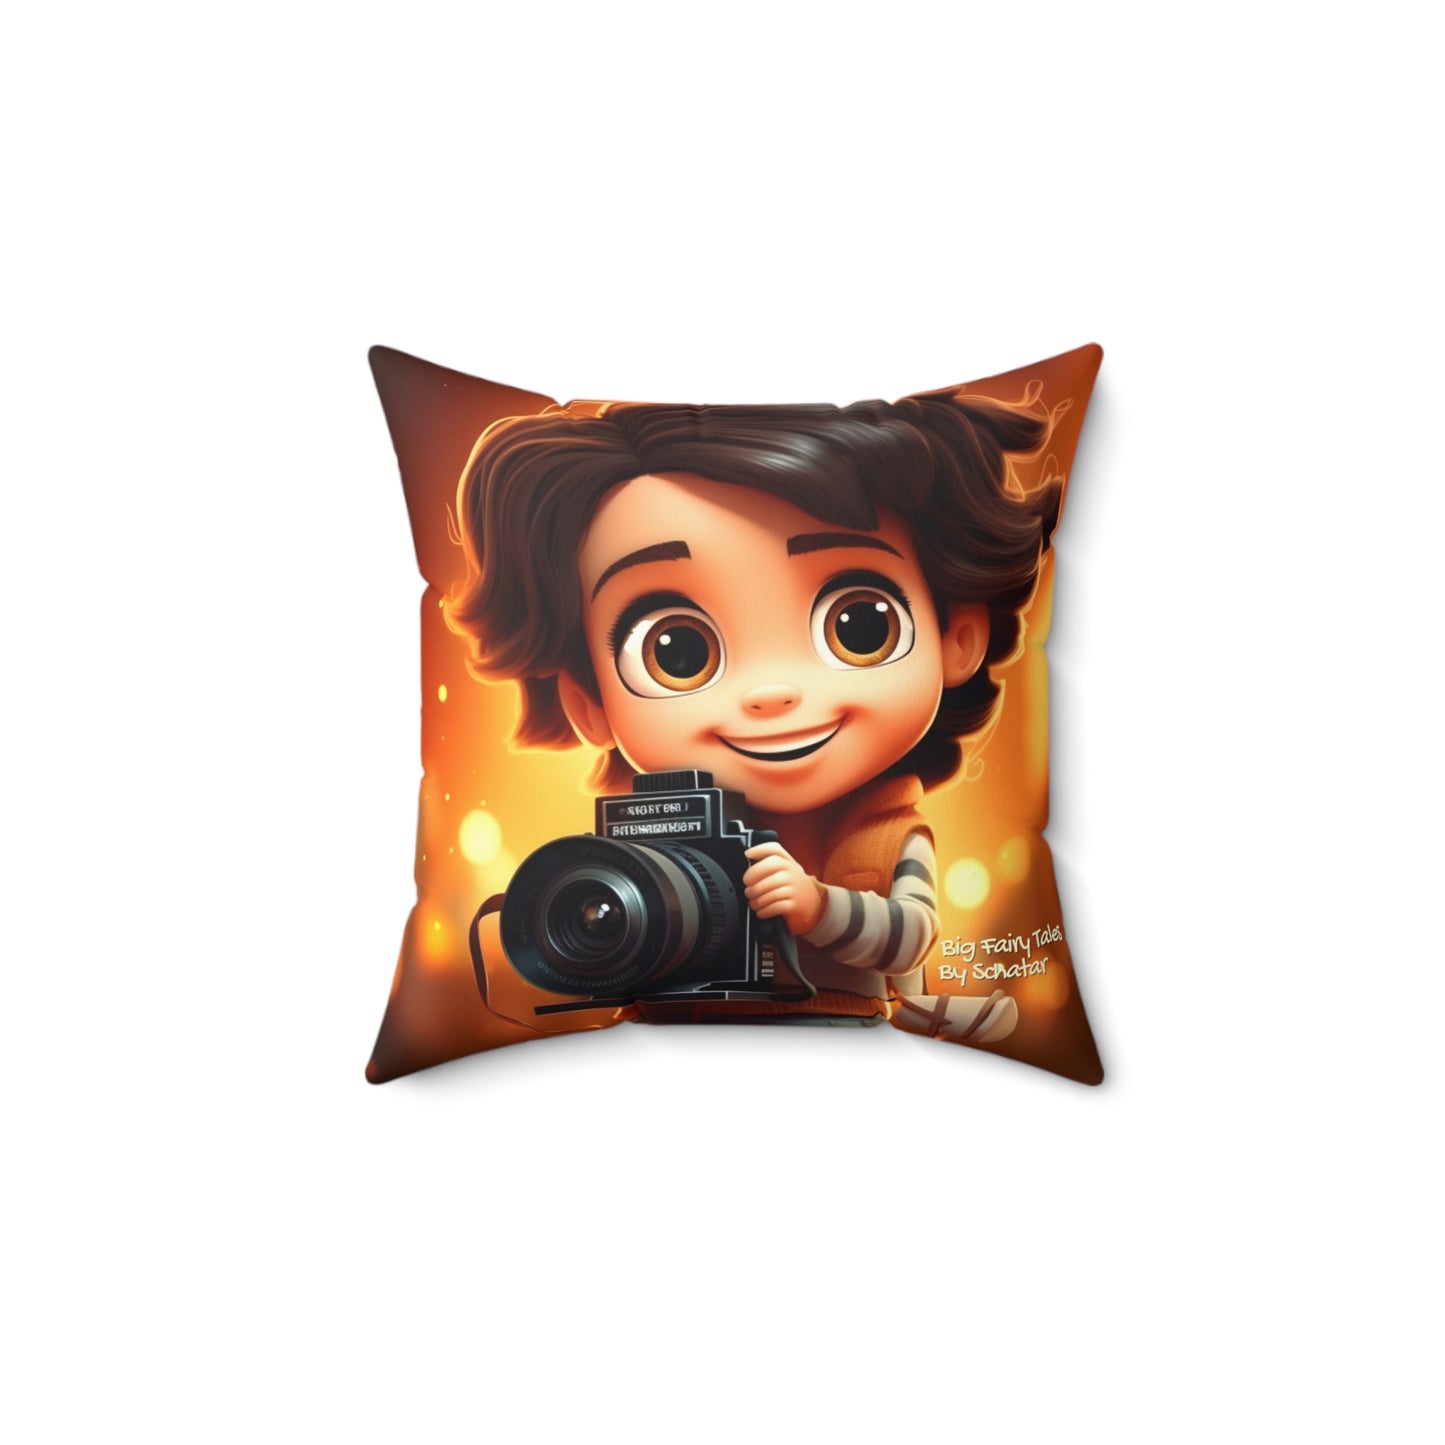 Cinematographer - Big Little Professionals Plush Pillow 4 From Big Fairy Tales By Schatar